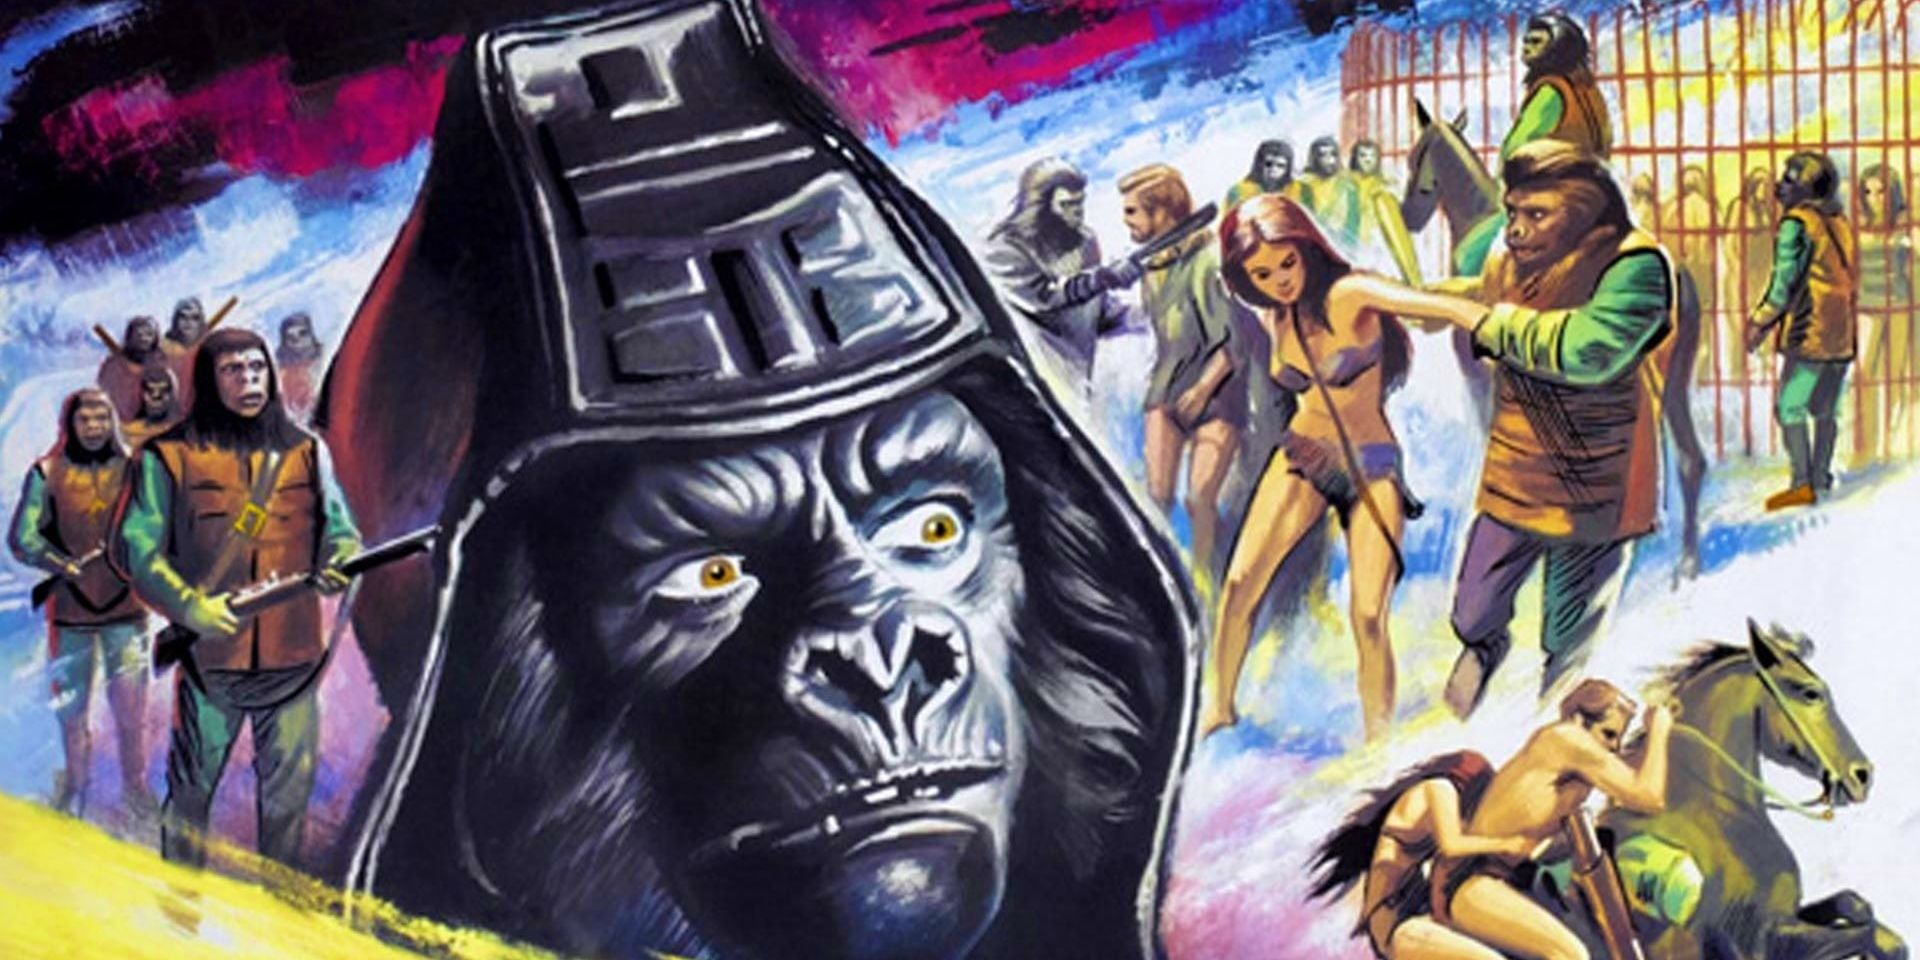 Every Planet Of The Apes Movie, Ranked Worst To Best (Including Kingdom)